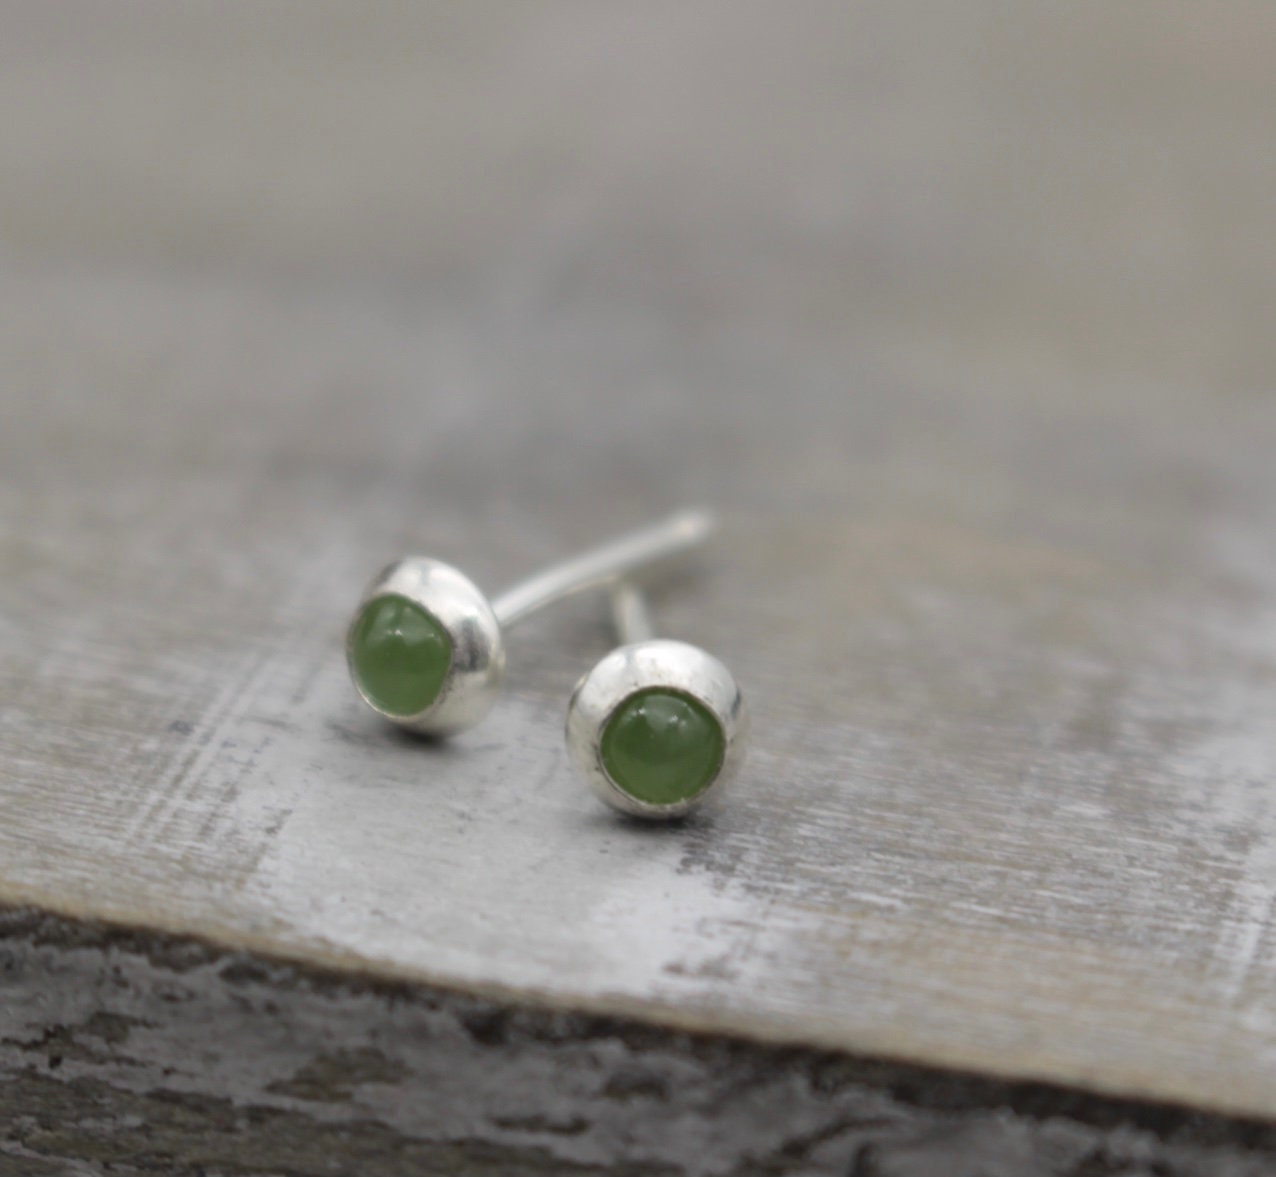 Tiny Jade Stud Earrings - sterling silver earring - Jade Jewelry - 3mm Studs - Gift for Her